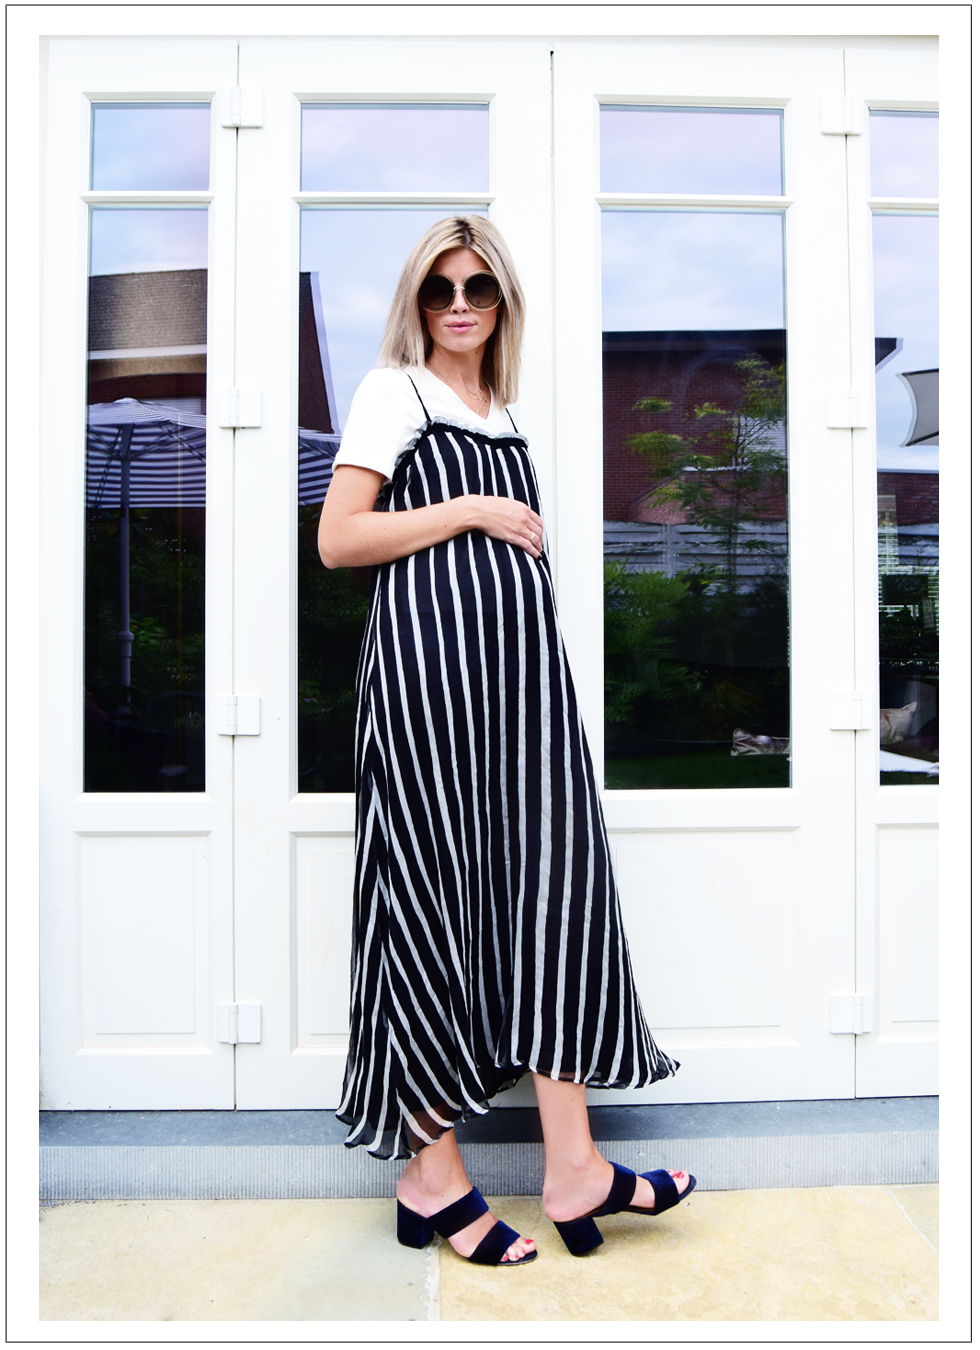 Outfit of the day, Nanushka, Sofie's Choice, Chloé, Dewolf, Anne Zellien, Minitials, Tiffany Co, Rosefield, Maje, ootd, style, fashion, blogger, prgenant, bump, maternity, summer